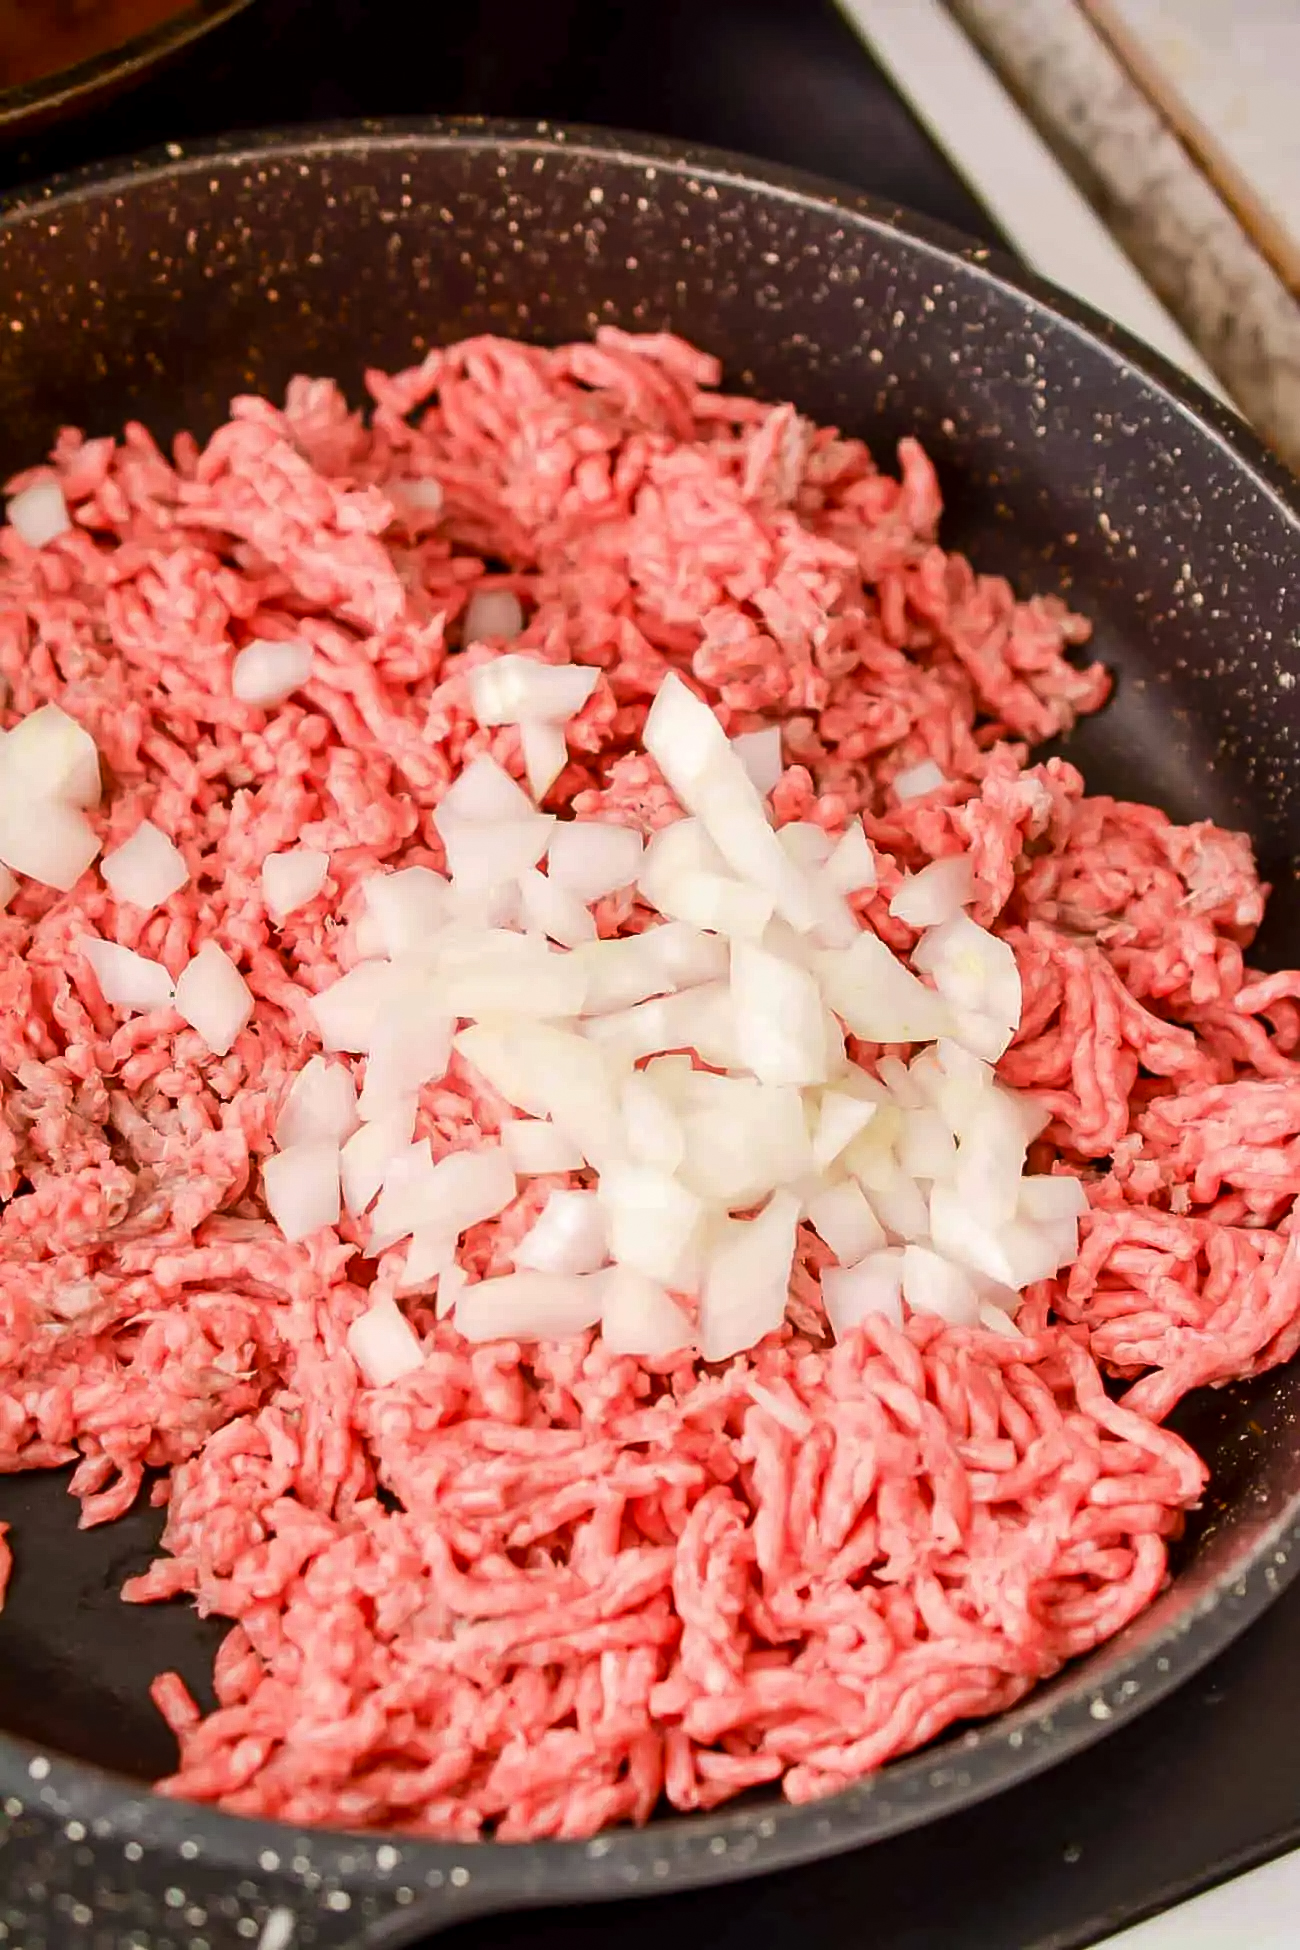 While the spaghetti is cooking, saute the meat and onion in a skillet over medium-high heat until the meat is browned and the onions are softened.